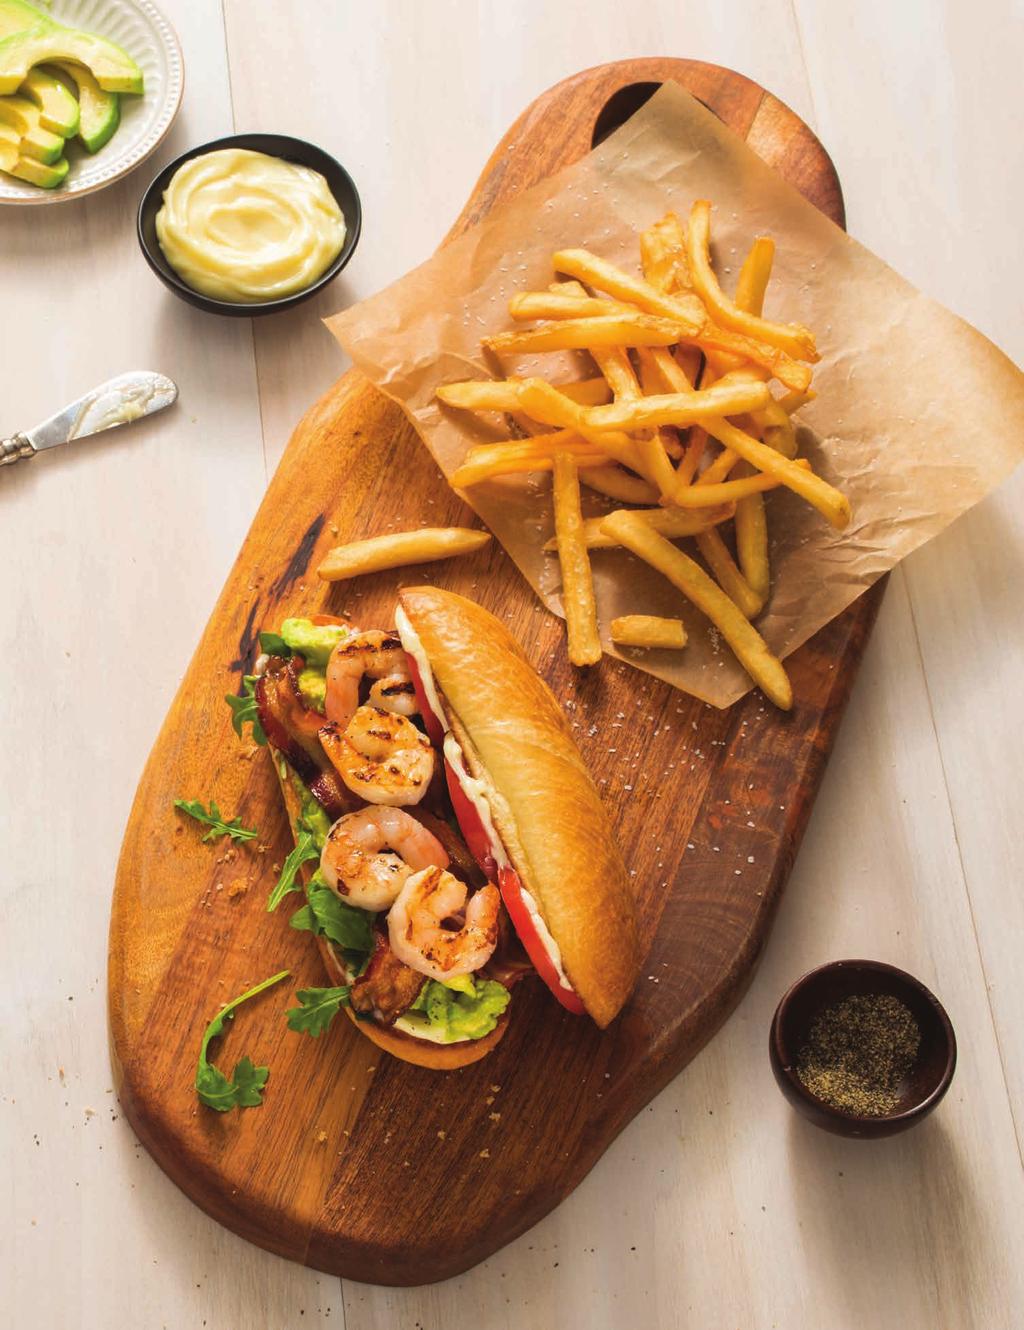 Grilled Shrimp BLT with Avocado Outback favorite ± Item contains or may contain nuts * These items are cooked to order.